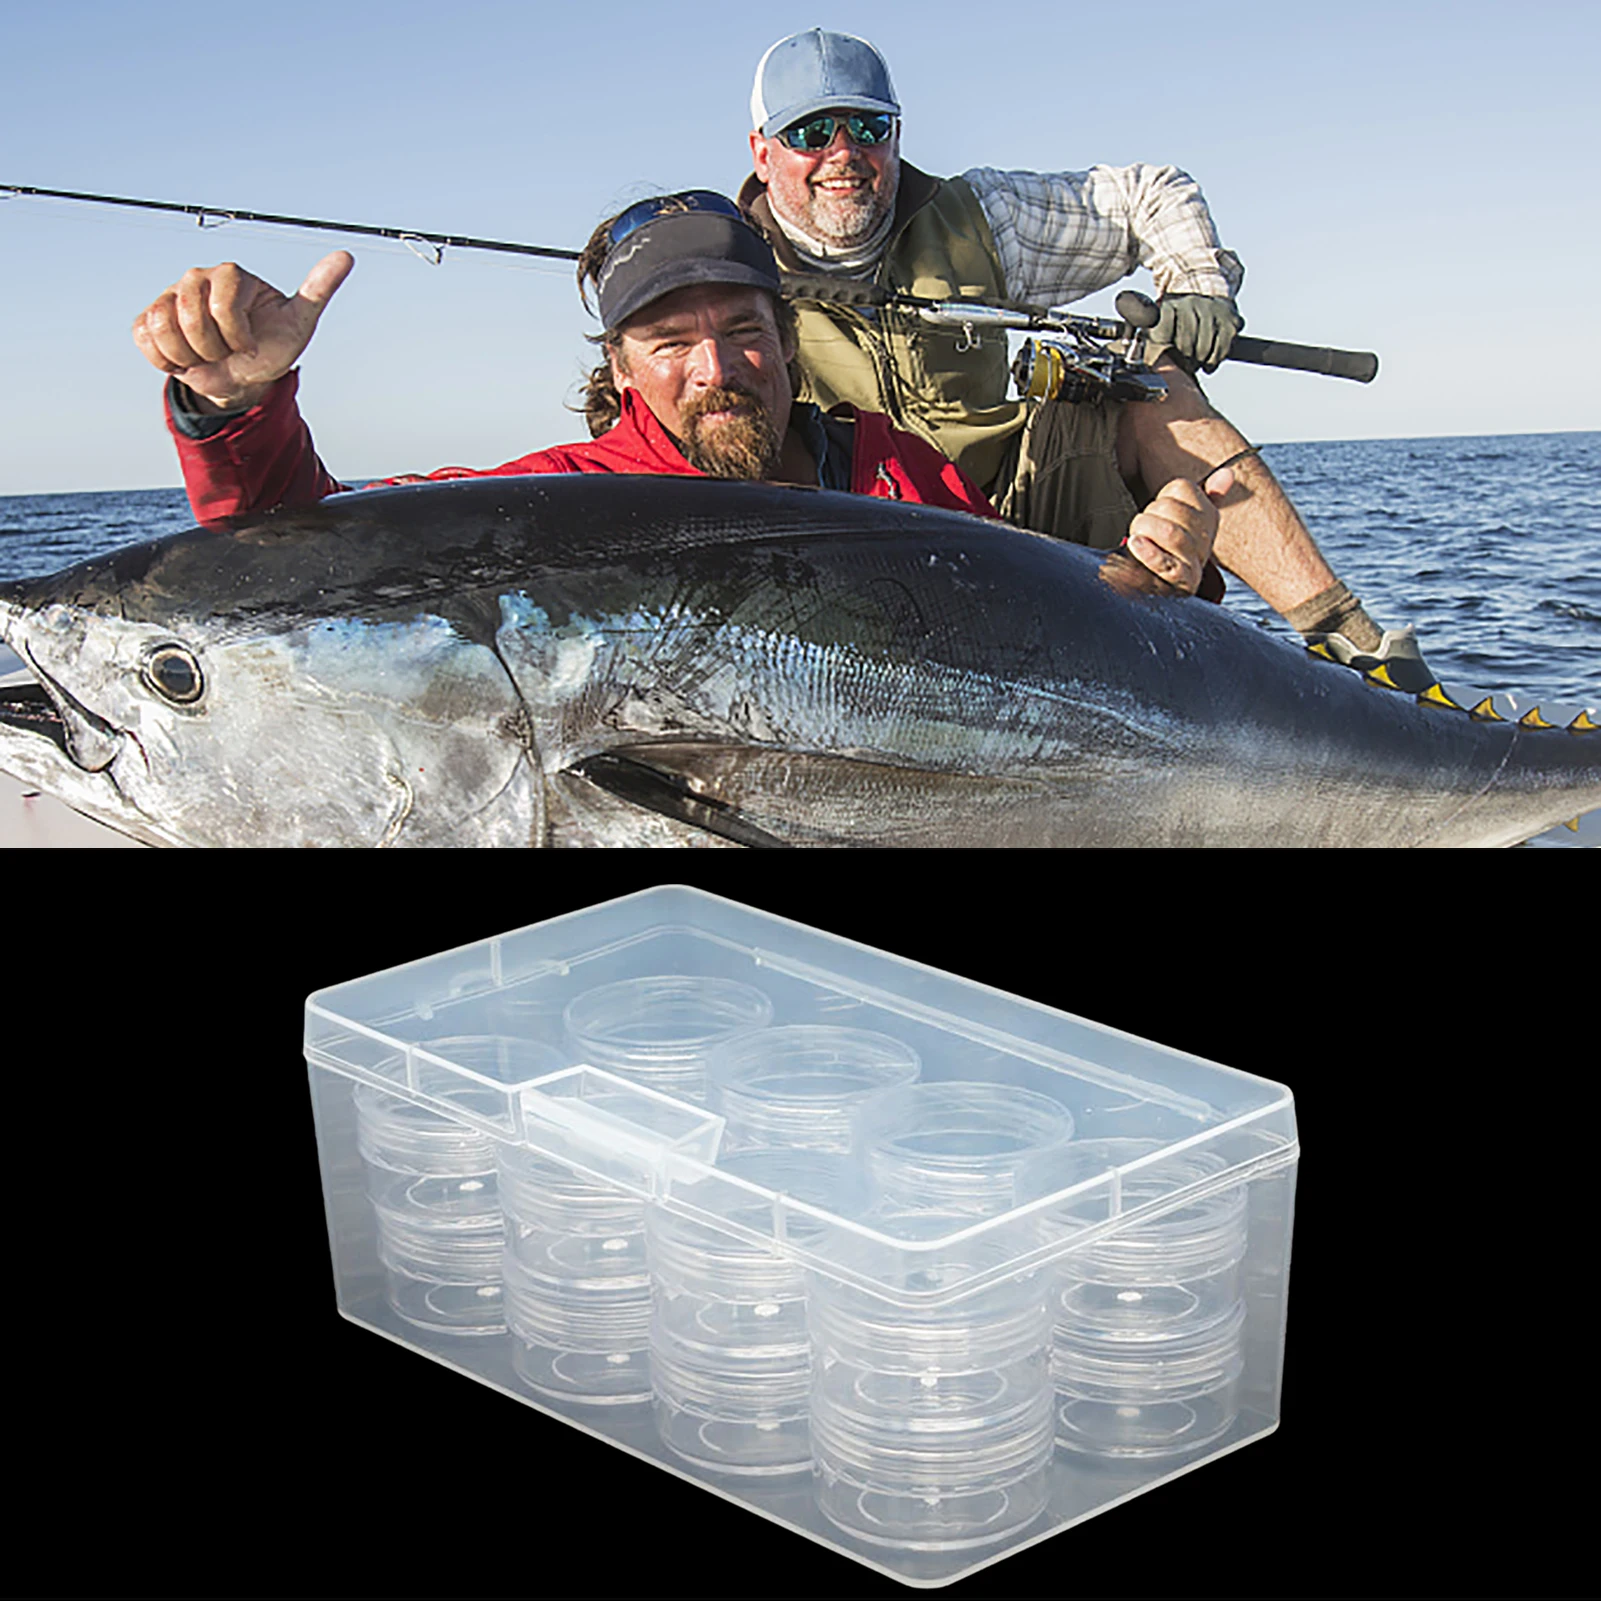 https://ae01.alicdn.com/kf/S8e14abf619df4b608430a89fe9c86ee6y/Tackle-Box-Organizer-Transparent-And-Tiered-Lure-Container-For-Fishing-Fishing-Bait-Storage-Easy-To-Clean.jpg